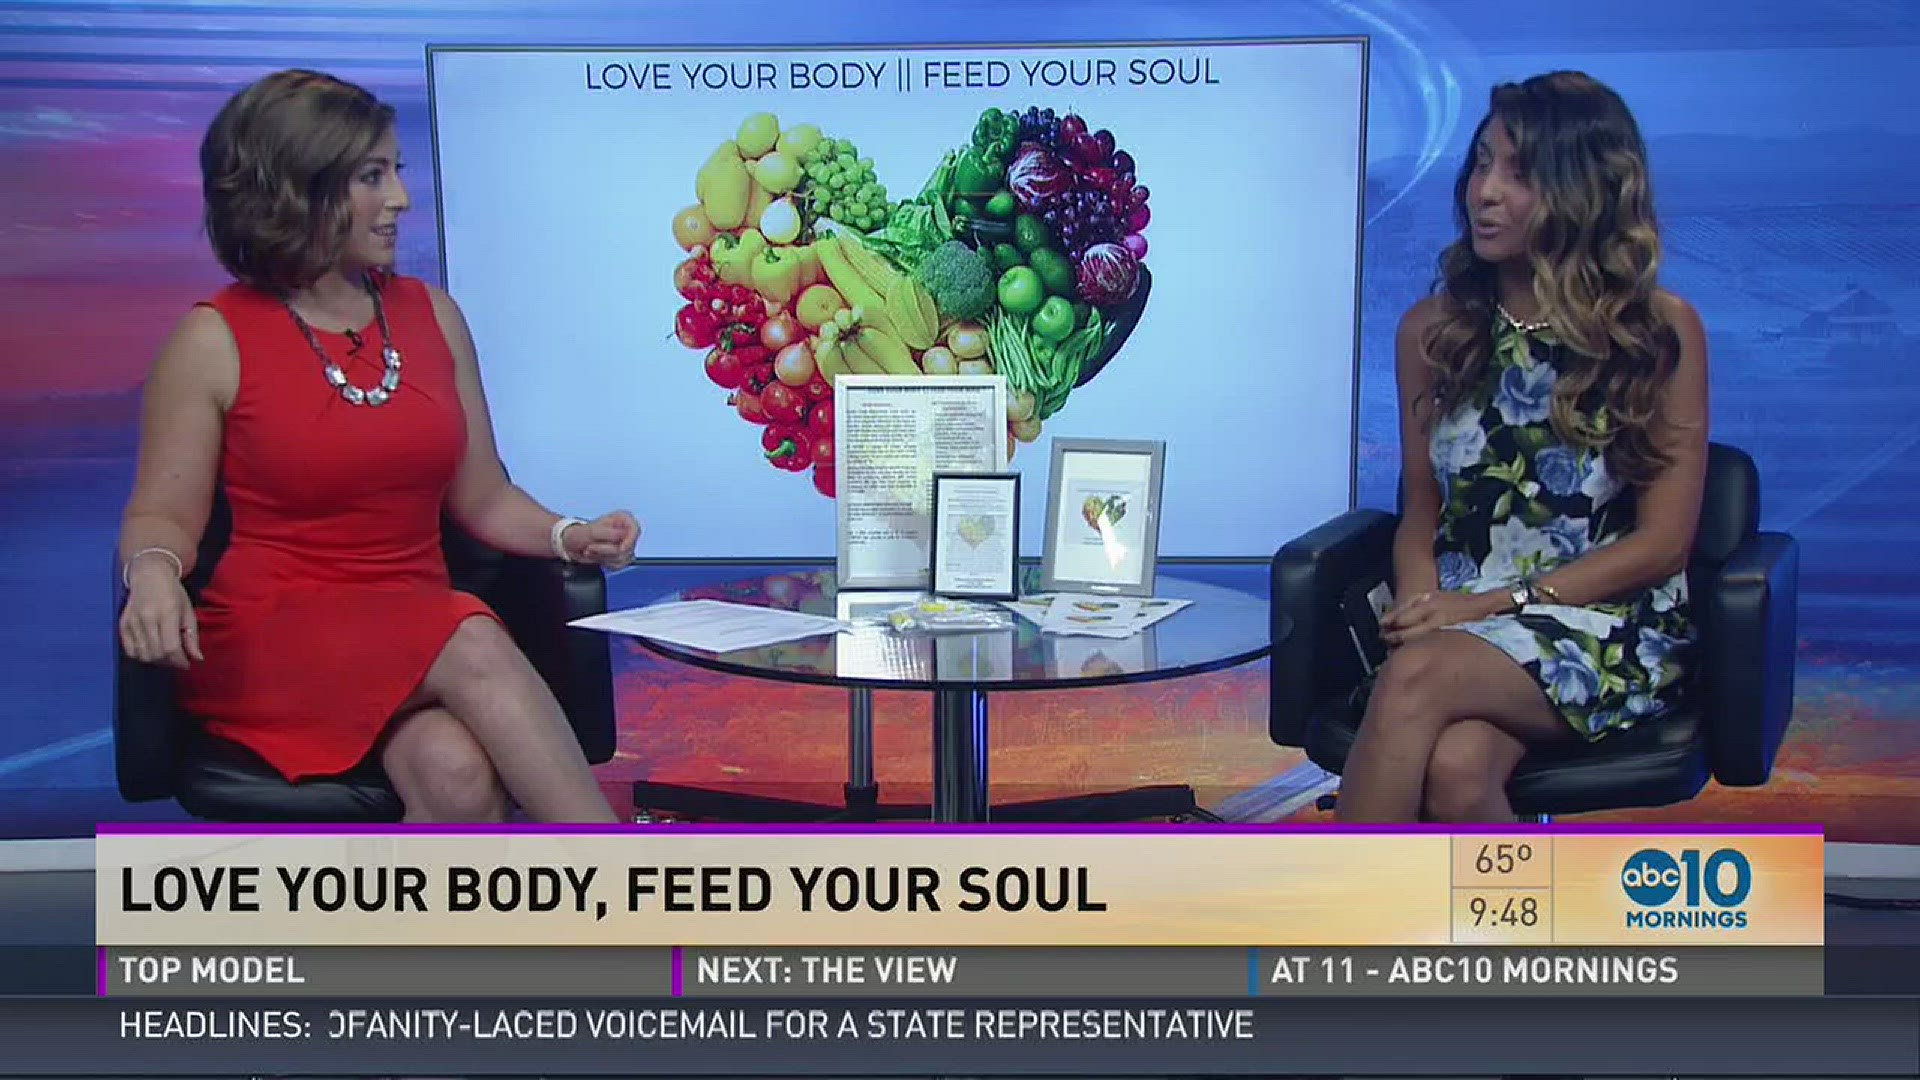 Love Your Body ' Feed Your Soul' promotes healthy living